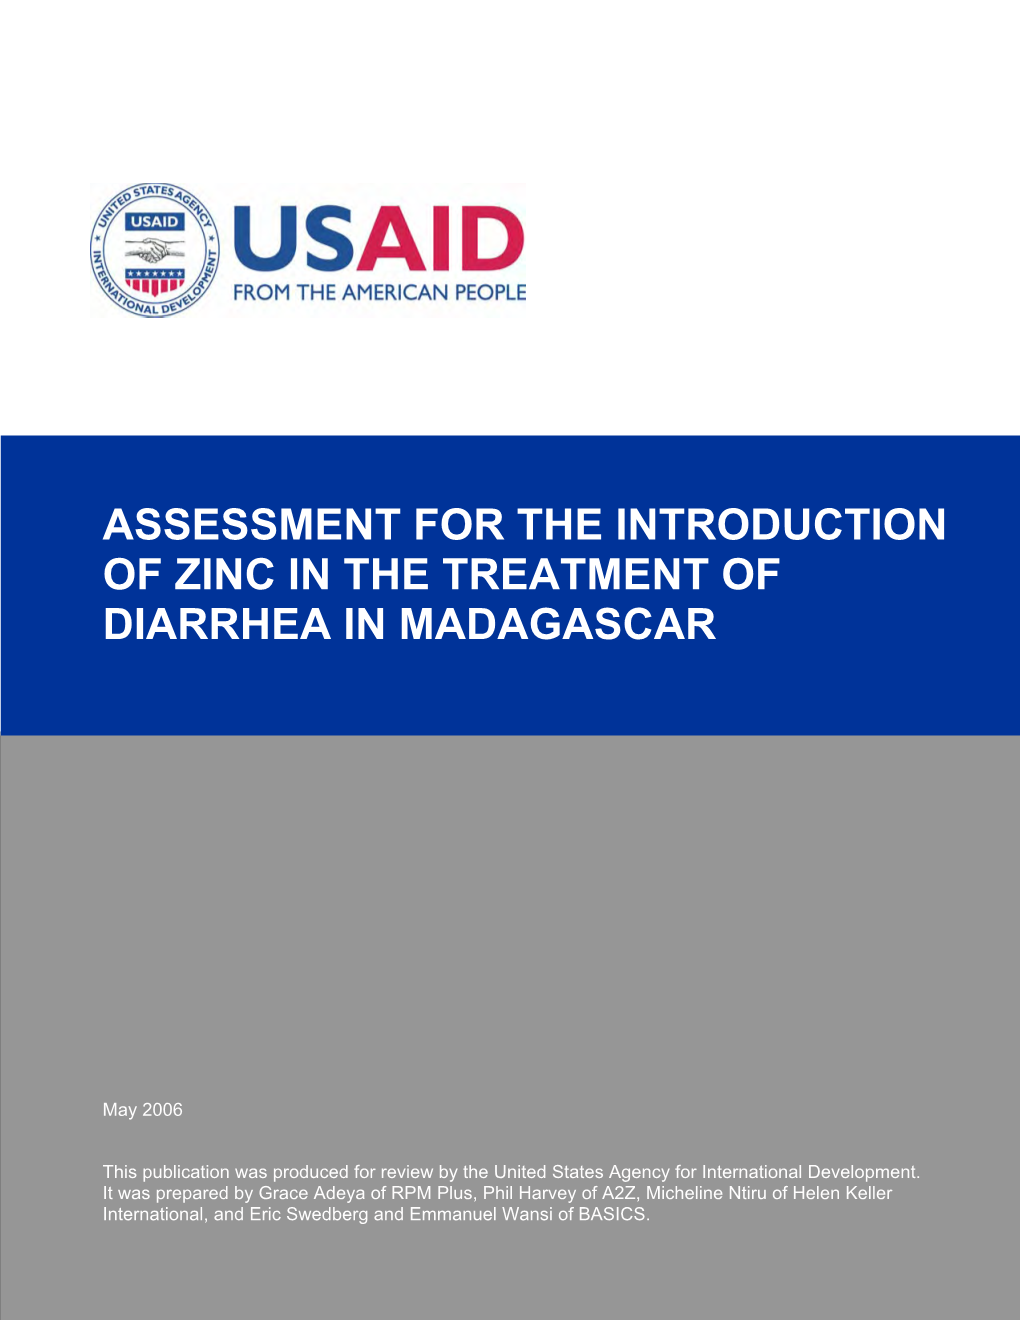 Assessment for the Introduction of Zinc in the Treatment of Diarrhea in Madagascar